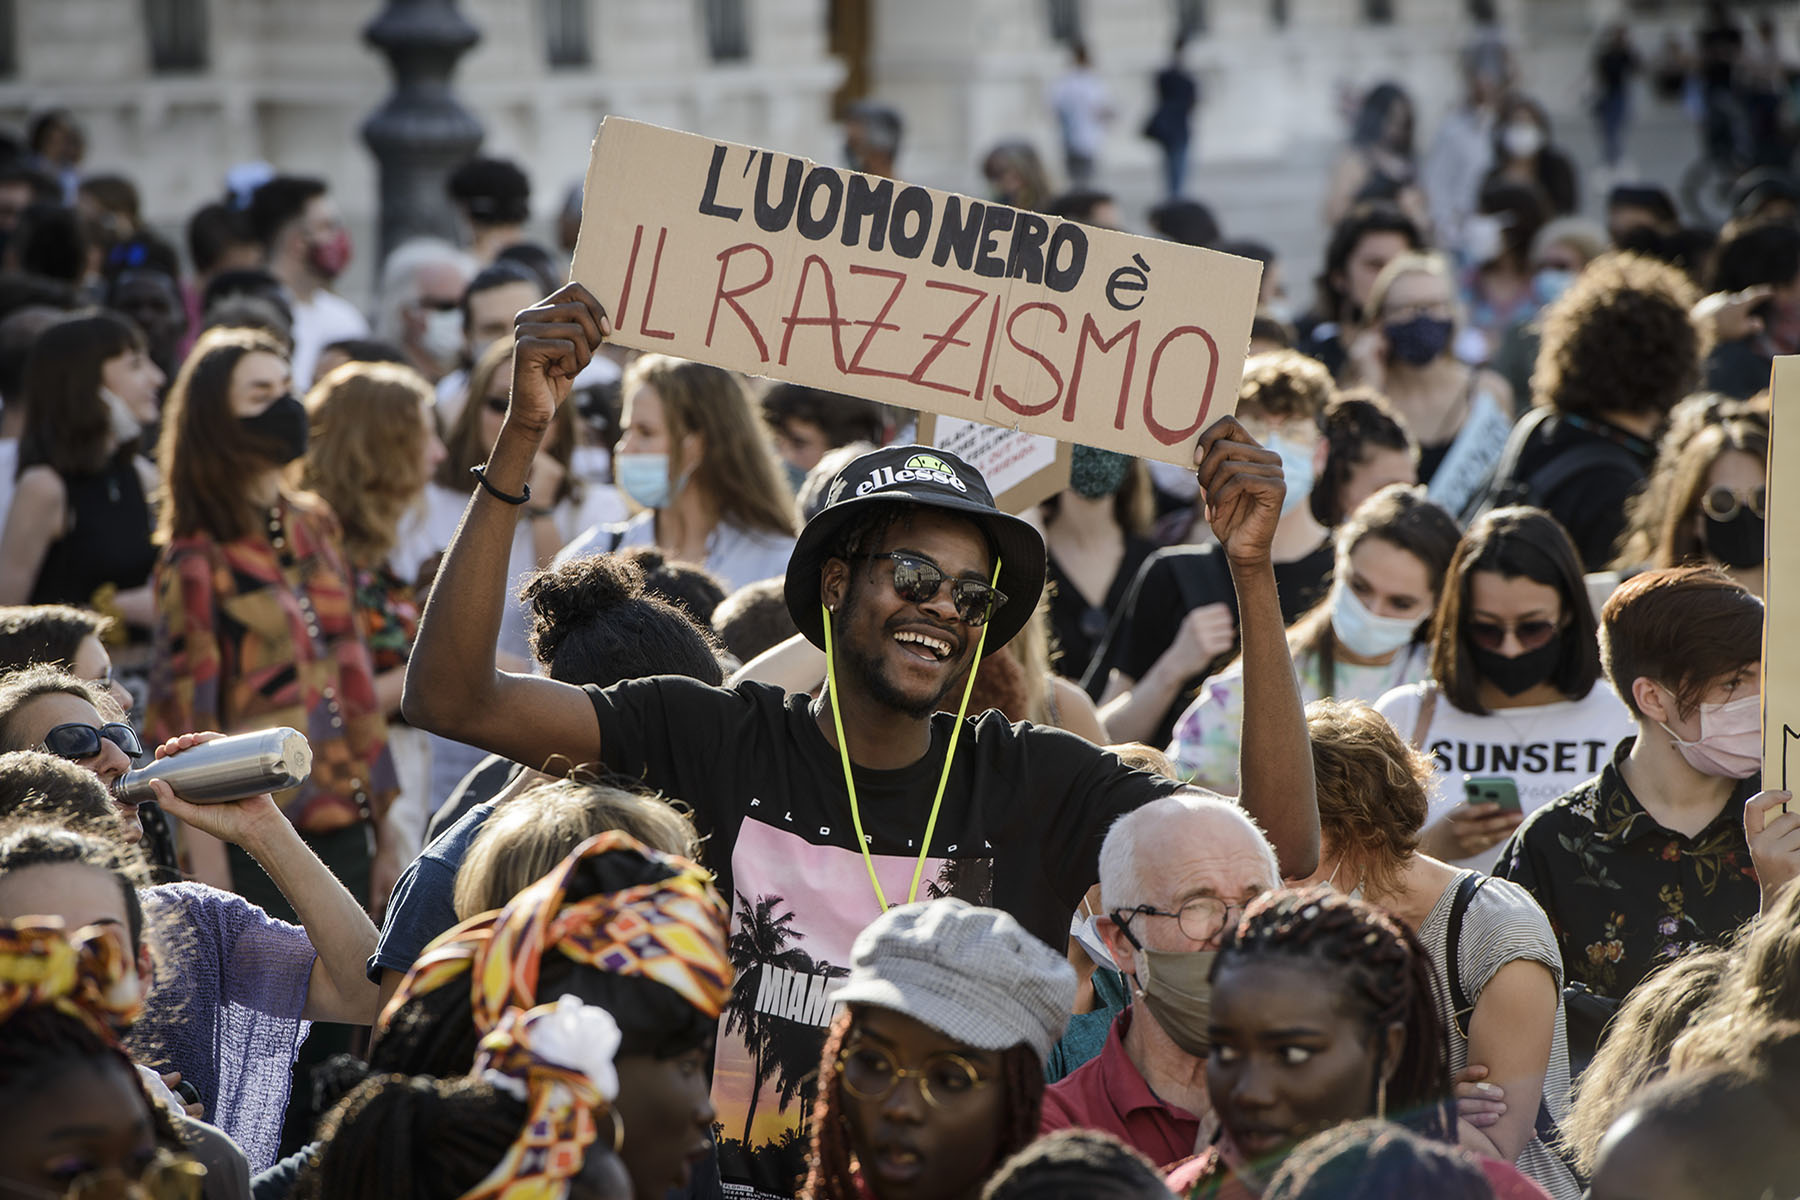 Protesters gathering with signs and messages to celebrate Black Culture during the 2020 BLM Protest in Trieste, Italy. Photo is focussed on a smiling Black man holding a sign that says 